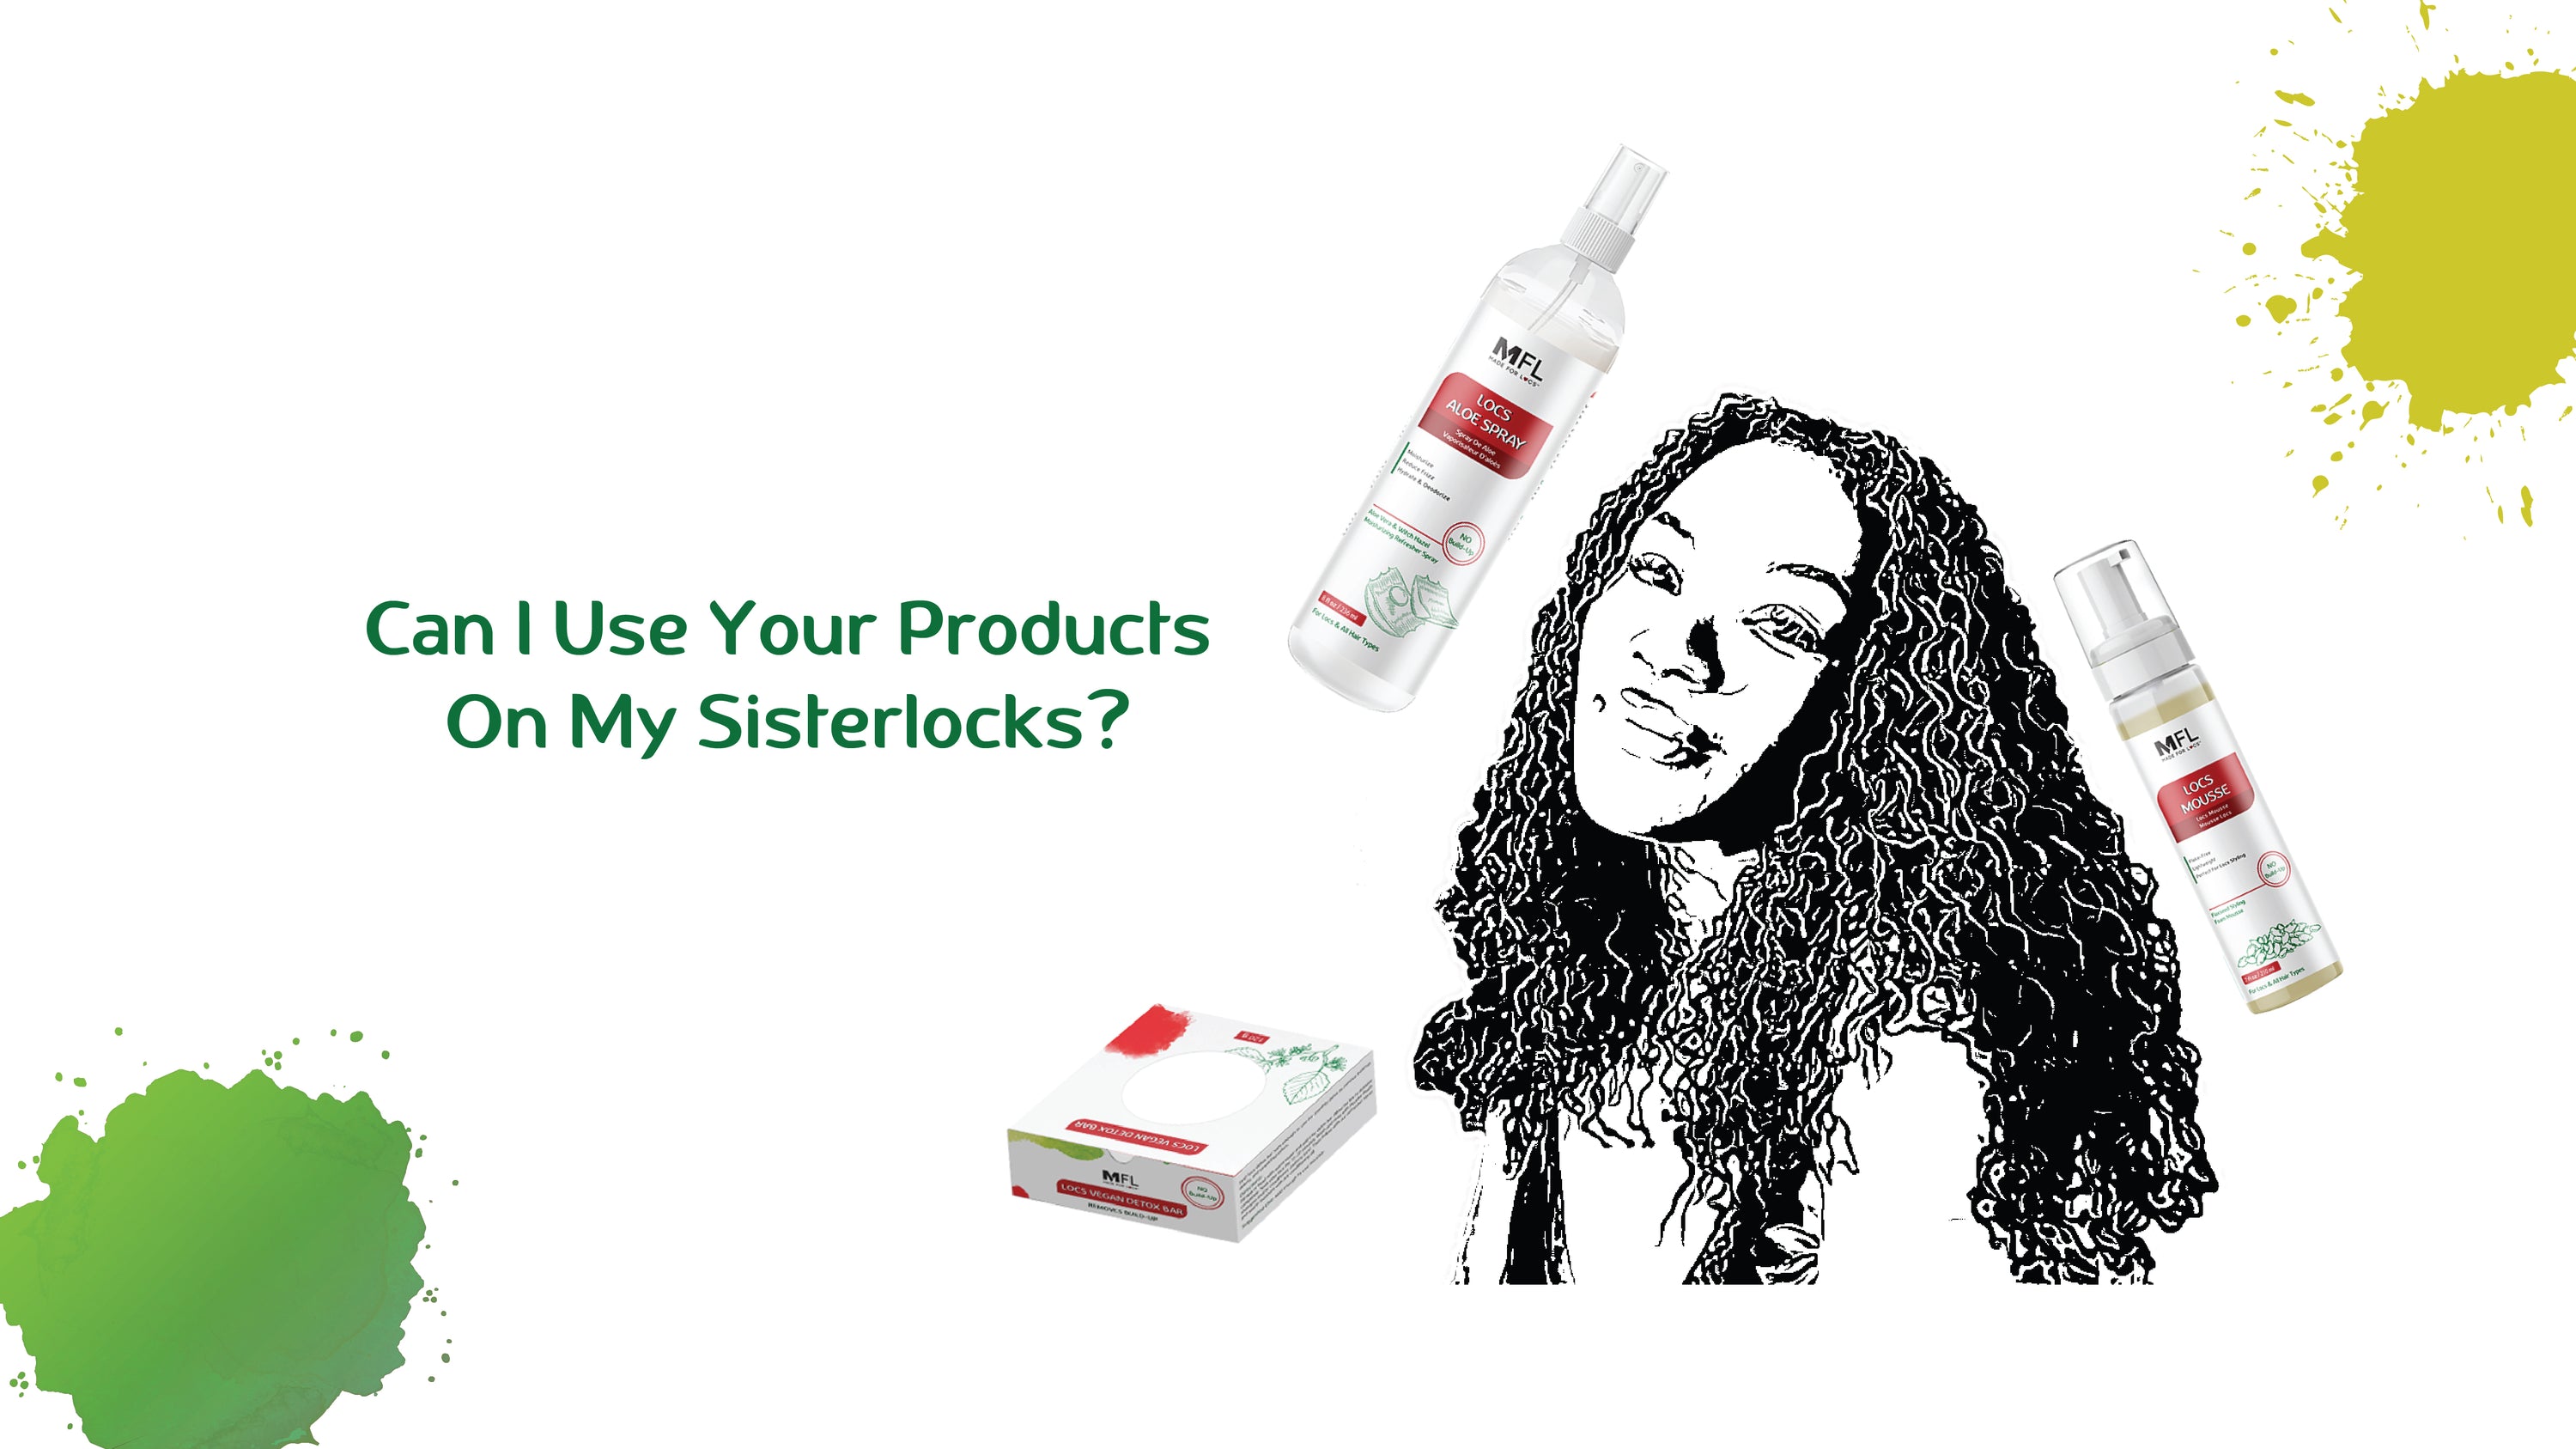 Can I Use Your Products On My Sisterlocks?